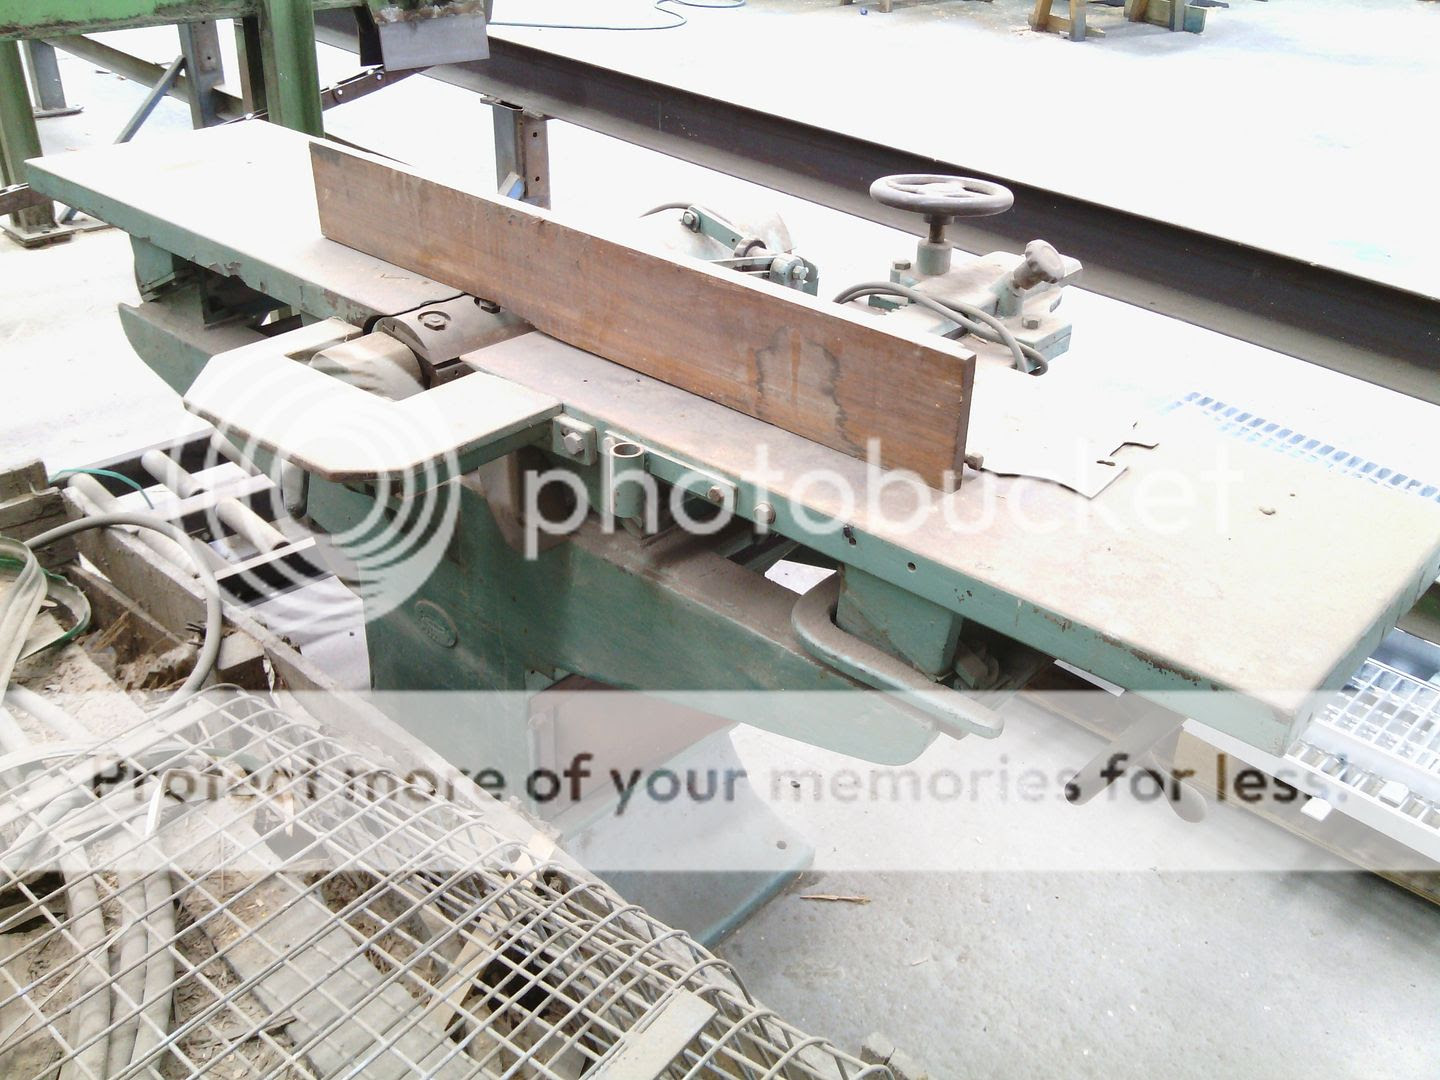 Woodworking Machinery Auctions Melbourne - ofwoodworking